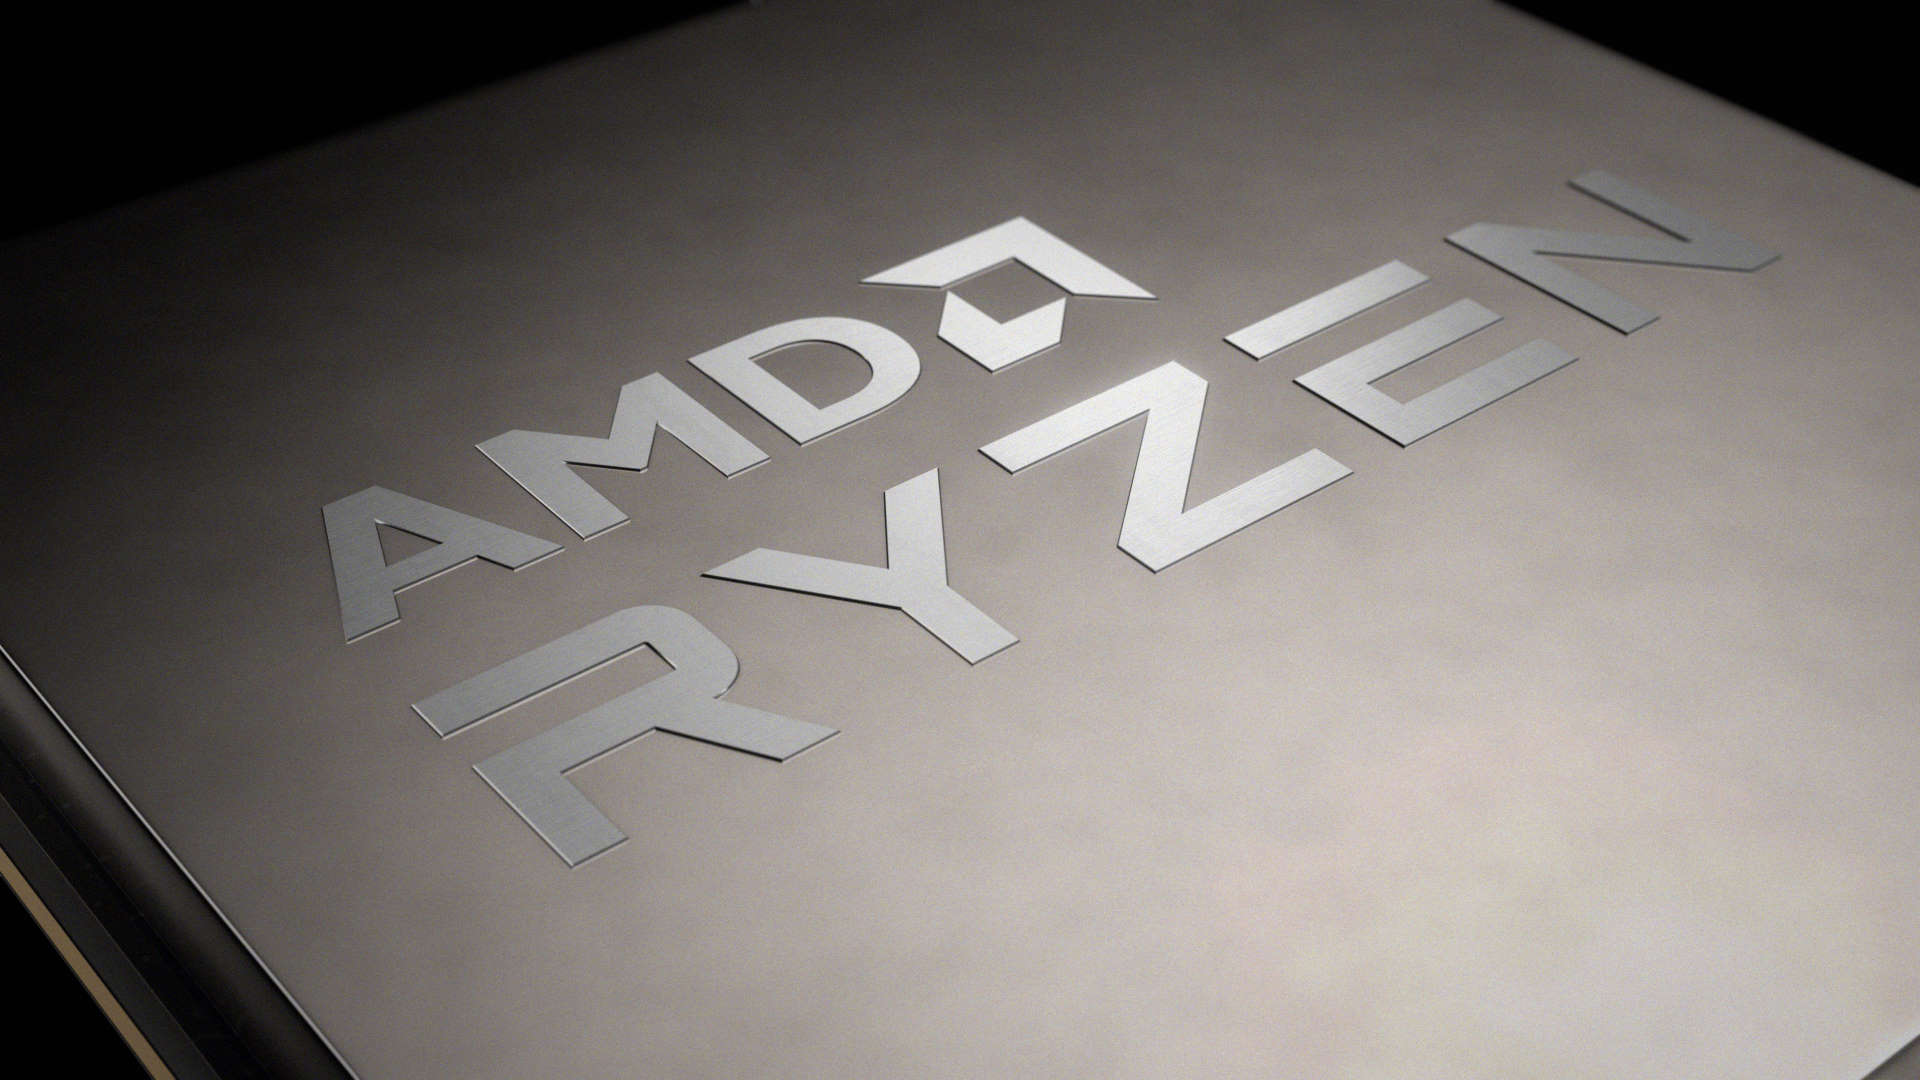  AMD SMCA patches could point to hybrid Alder Lake-like CPUs 